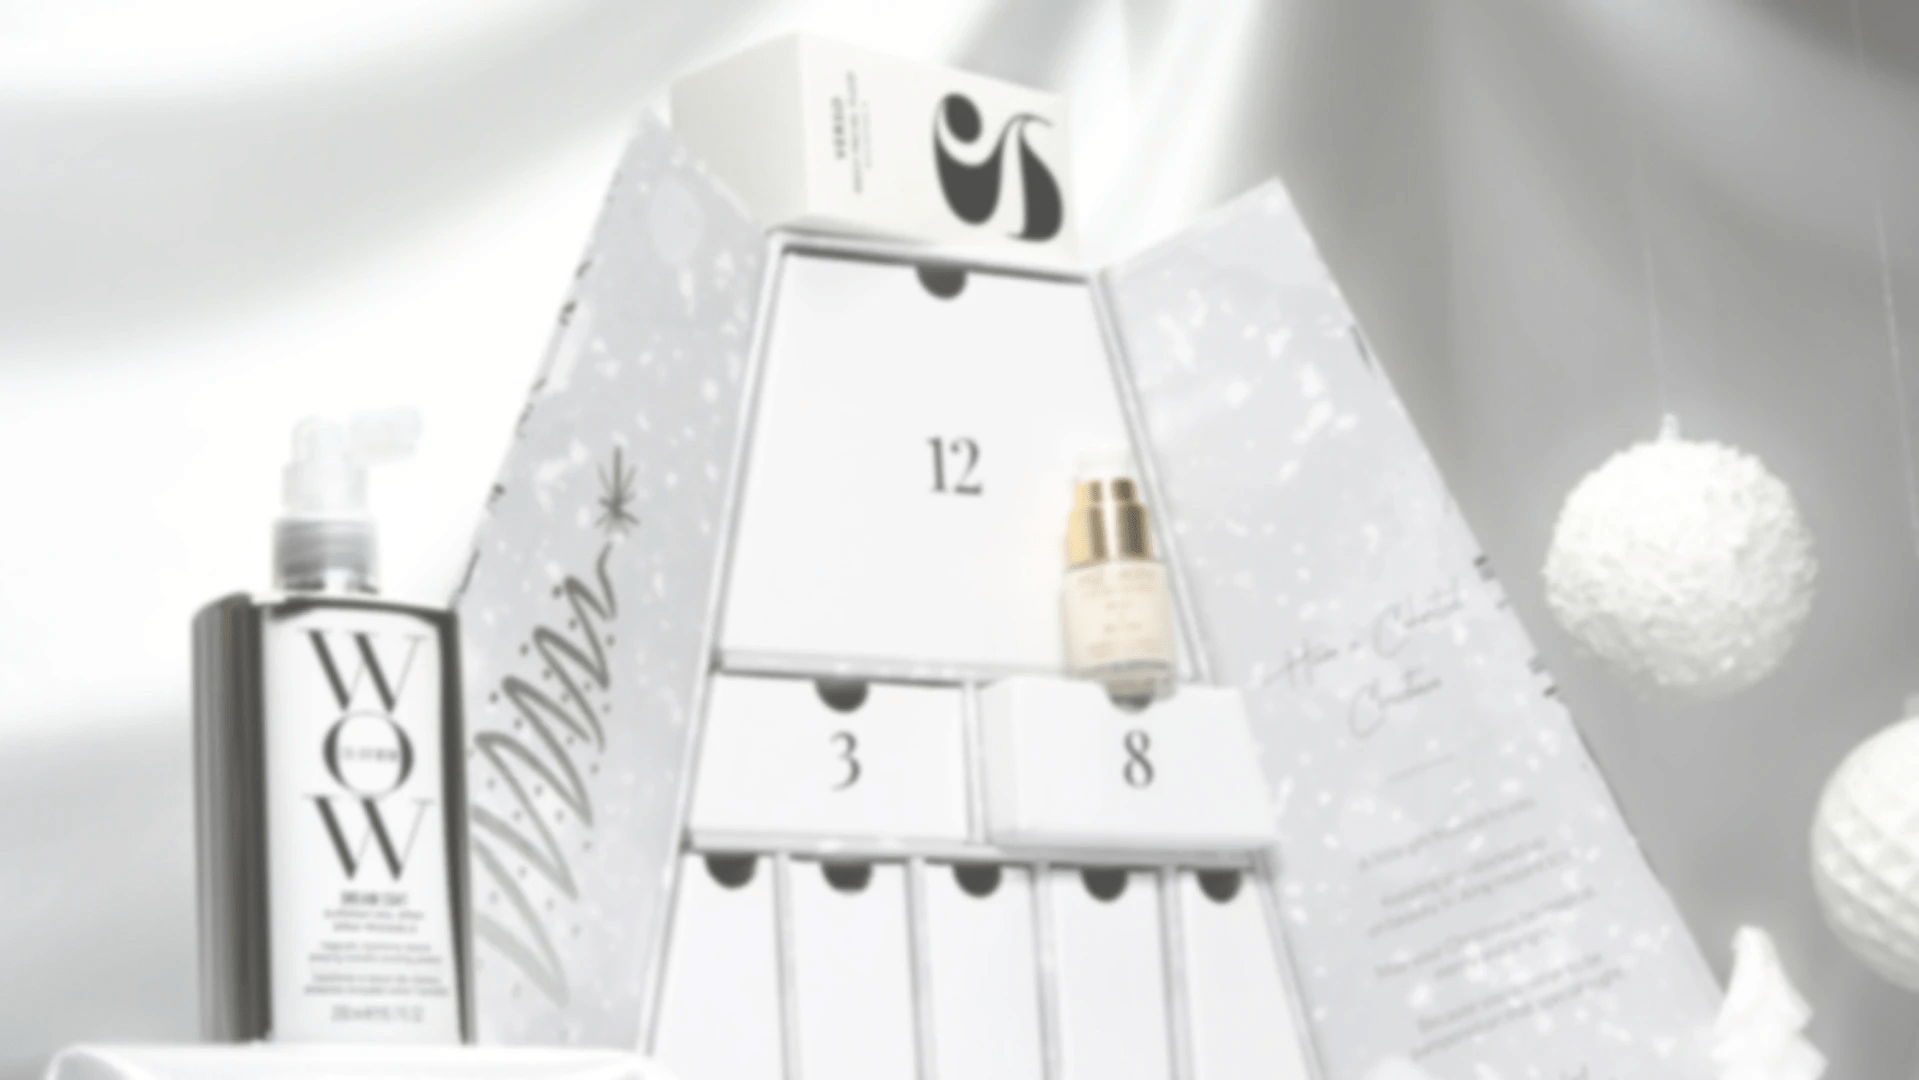 Cohorted Beauty Advent Calendar 2021 Bigger and Better This Year